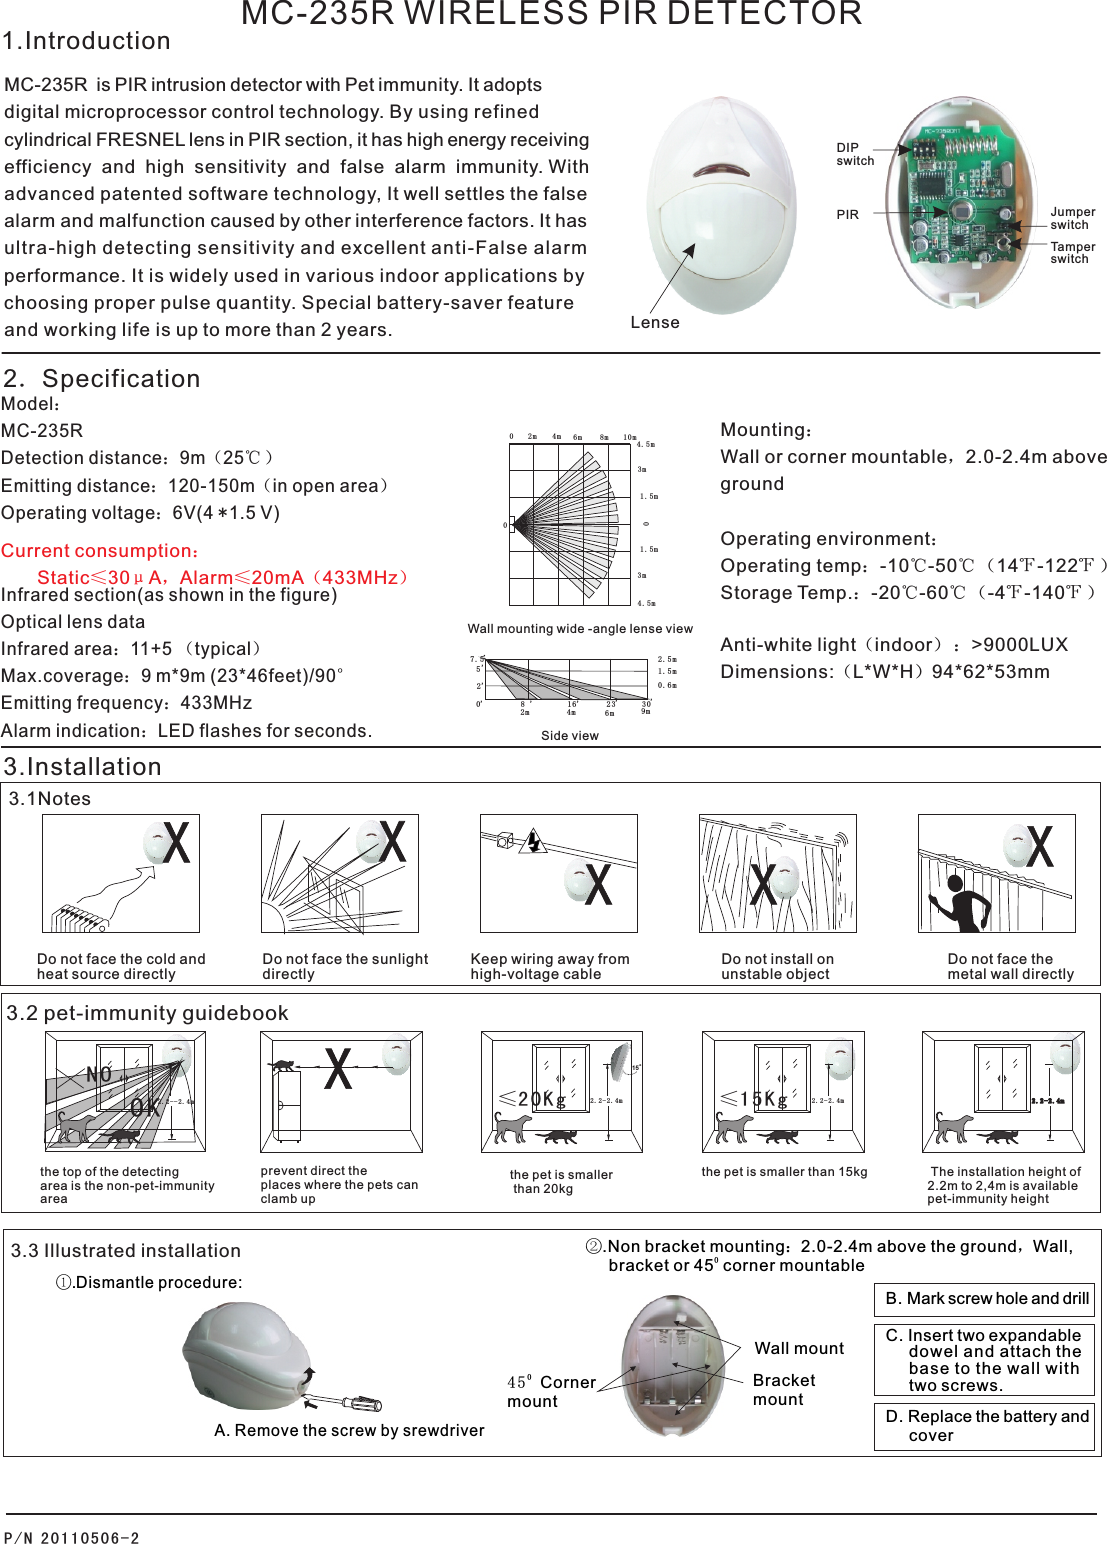      MC-235R WIRELESS PIR DETECTOR MC-235R  is PIR intrusion detector with Pet immunity. It adoptsdigital microprocessor control technology. By using refined cylindrical FRESNEL lens in PIR section, it has high energy receivingefficiency  and  high  sensitivity  and  false  alarm  immunity. With advanced patented software technology, It well settles the false alarm and malfunction caused by other interference factors. It hasultra-high detecting sensitivity and excellent anti-False alarm performance. It is widely used in various indoor applications by choosing proper pulse quantity. Special battery-saver feature and working life is up to more than 2 years. Model：MC-235R    Detection distance：9m（25℃ ） Emitting distance：120-150m（in open area）Operating voltage：6V(4 *1.5 V)Infrared section(as shown in the figure)Optical lens dataInfrared area：11+5 （typical）Max.coverage：9 m*9m (23*46feet)/90°Emitting frequency：433MHzAlarm indication：LED flashes for seconds.Mounting：Wall or corner mountable，2.0-2.4m above groundOperating environment：Operating temp：-10℃-50℃ （14℉-122℉ ）Storage Temp.：-20℃-60℃ （-4℉-140℉ ）Anti-white light（indoor） ：&gt;9000LUXDimensions:（L*W*H）94*62*53mm3.Installation2．Specification3.1NotesWall mounting wide -angle lense view Side view2. 5 m1. 5 m0. 6 m6m4m2m7. 523 3 016,52,,,8,0,,,XXXX9mDo not face the cold andheat source directlyDo not face the sunlightdirectlyKeep wiring away from high-voltage cableDo not install on unstable objectDo not face themetal wall directly1.IntroductionP/ N 201 10 5 06 - 2LensePIRTamper switch01.5m1.5m3m3m4.5m4.5m10m8m6m4m2m00JumperswitchXDIP switchCurrent consumption：       Static≤30μA，Alarm≤20mA（433MHz）       3.2 pet-immunity guidebook The installation height of  2.2m to 2,4m is available pet-immunity height2.2- 2 . 4 m2.2- 2 . 4 m≤15K gthe pet is smaller than 15kgthe top of the detecting area is the non-pet-immunityareaNOOK2.2- - 2 . 4 m2.2- 2 . 4 m≤20K g15。the pet is smaller than 20kgprevent direct the places where the pets can clamb up X3.3 Illustrated installationWall mount②.Non bracket mounting：2.0-2.4m above the ground，Wall, 0     bracket or 45  corner mountable    B. Mark screw hole and drill C. Insert two expandable     dowel and attach the     base to the wall with      two screws.D. Replace the battery and     cover ①.Dismantle procedure: A. Remove the screw by srewdriverBracketmount0 4 5mount Corner